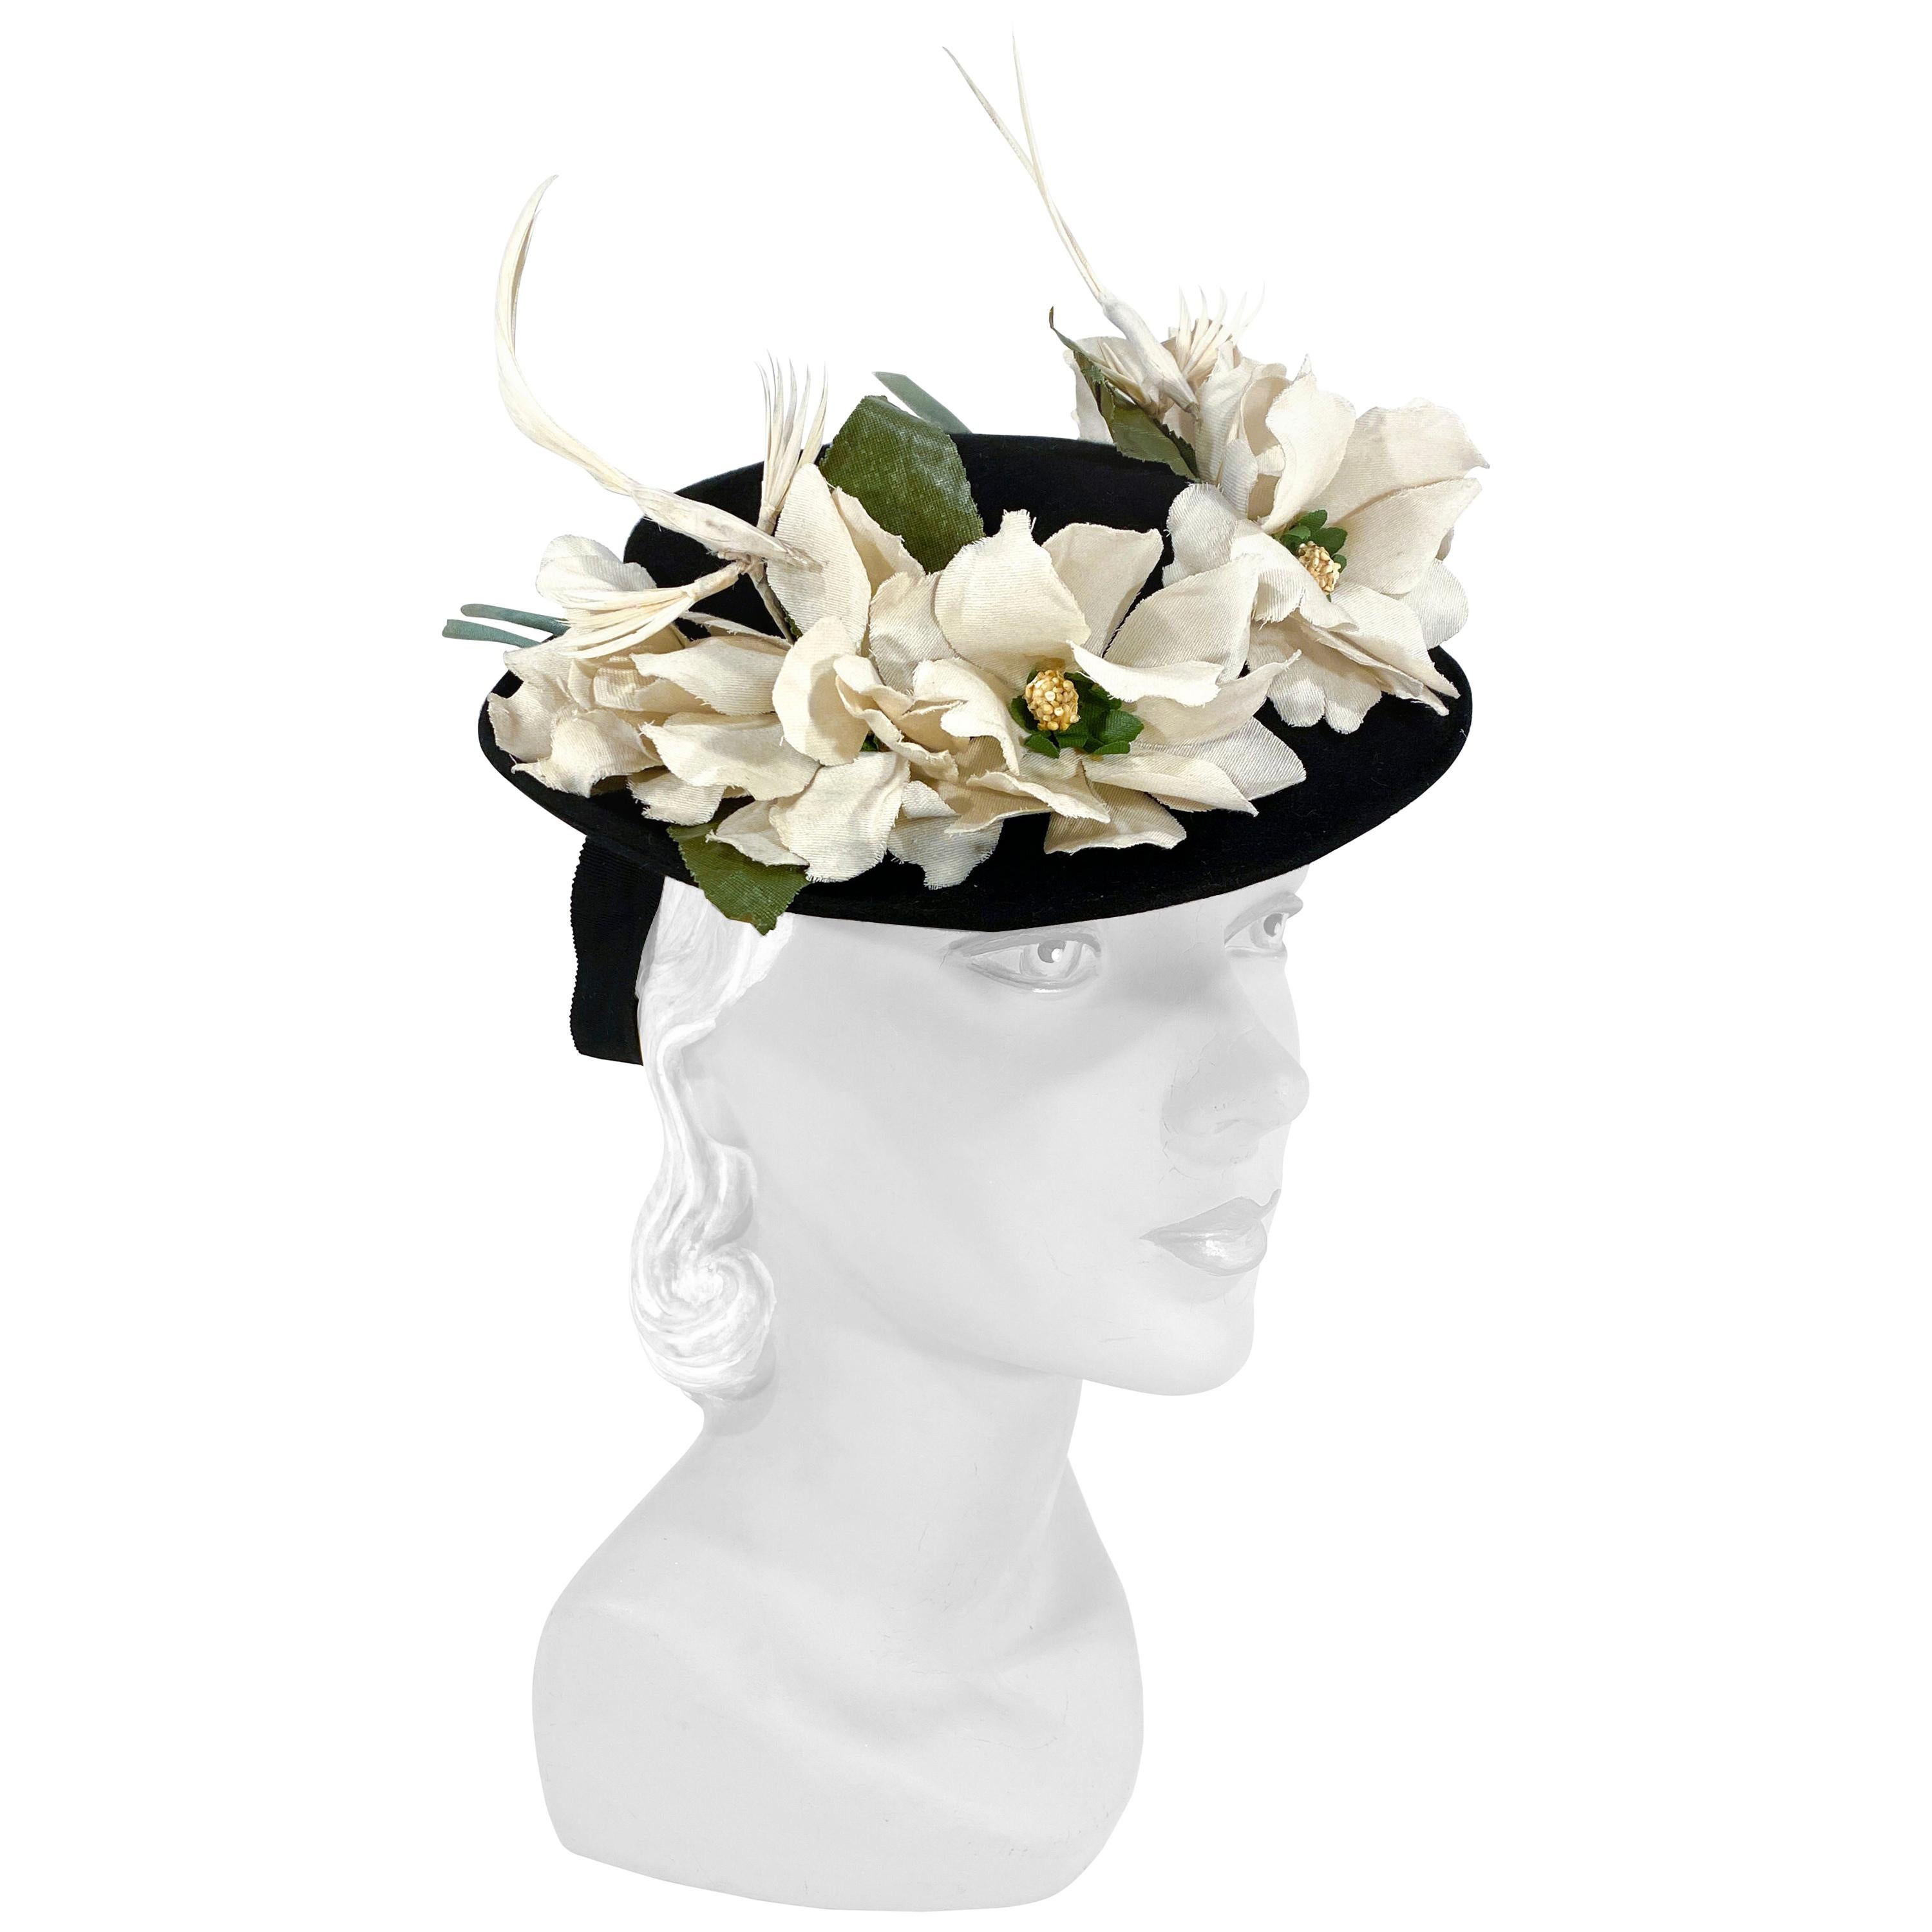 1940s Black Toy Hat with Flowers and Feathered Birds